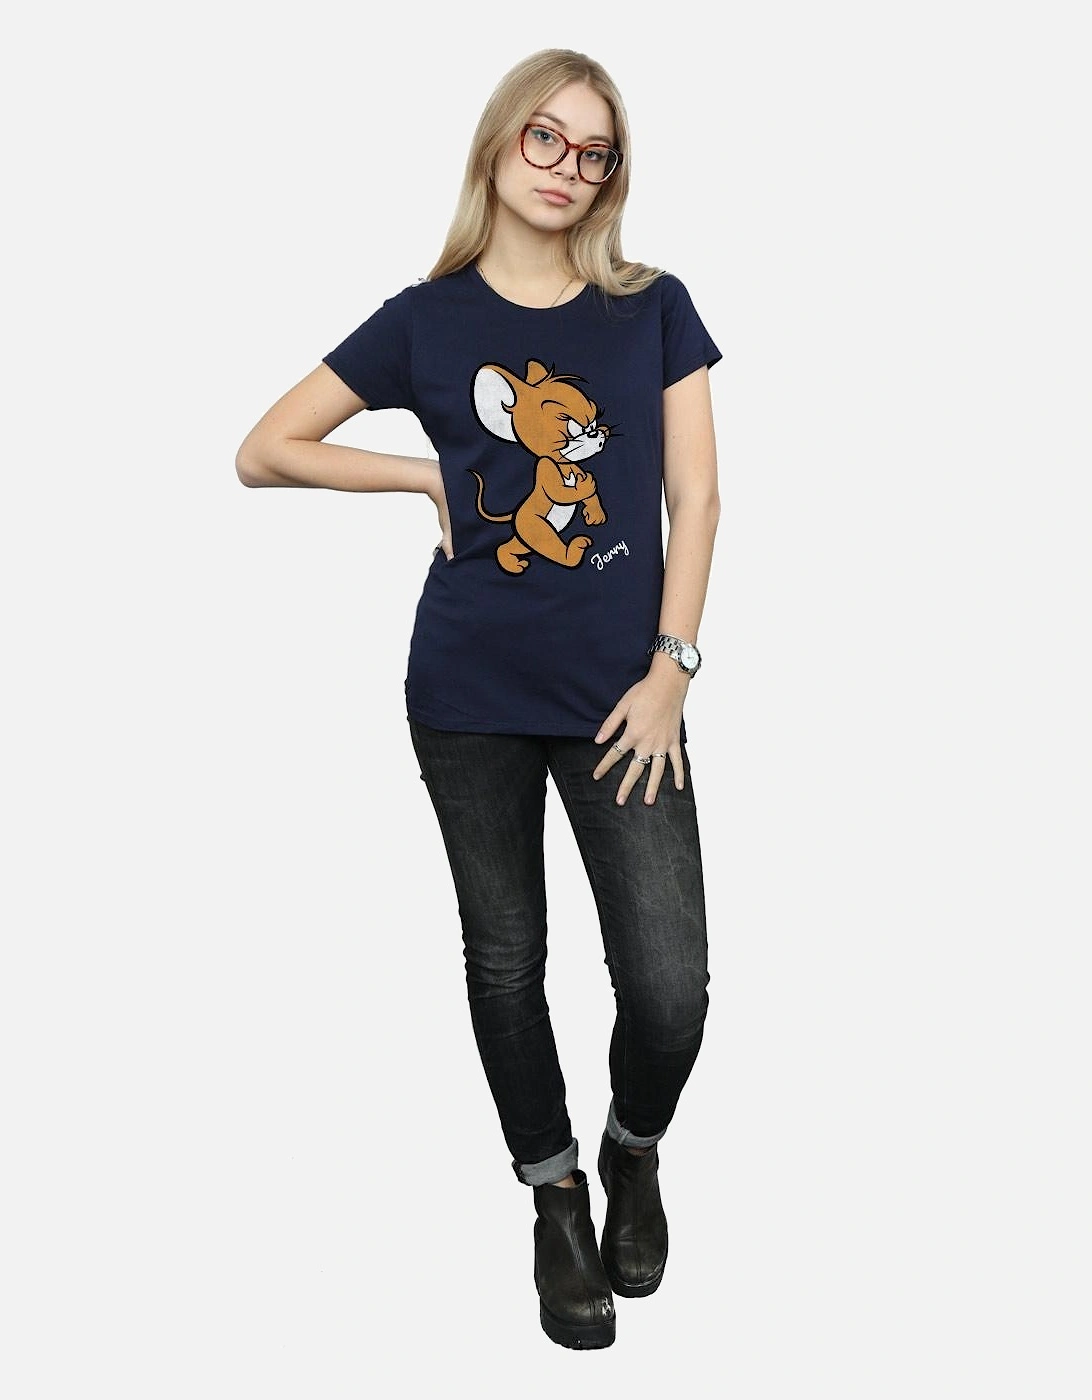 Tom and Jerry Womens/Ladies Angry Mouse Cotton T-Shirt